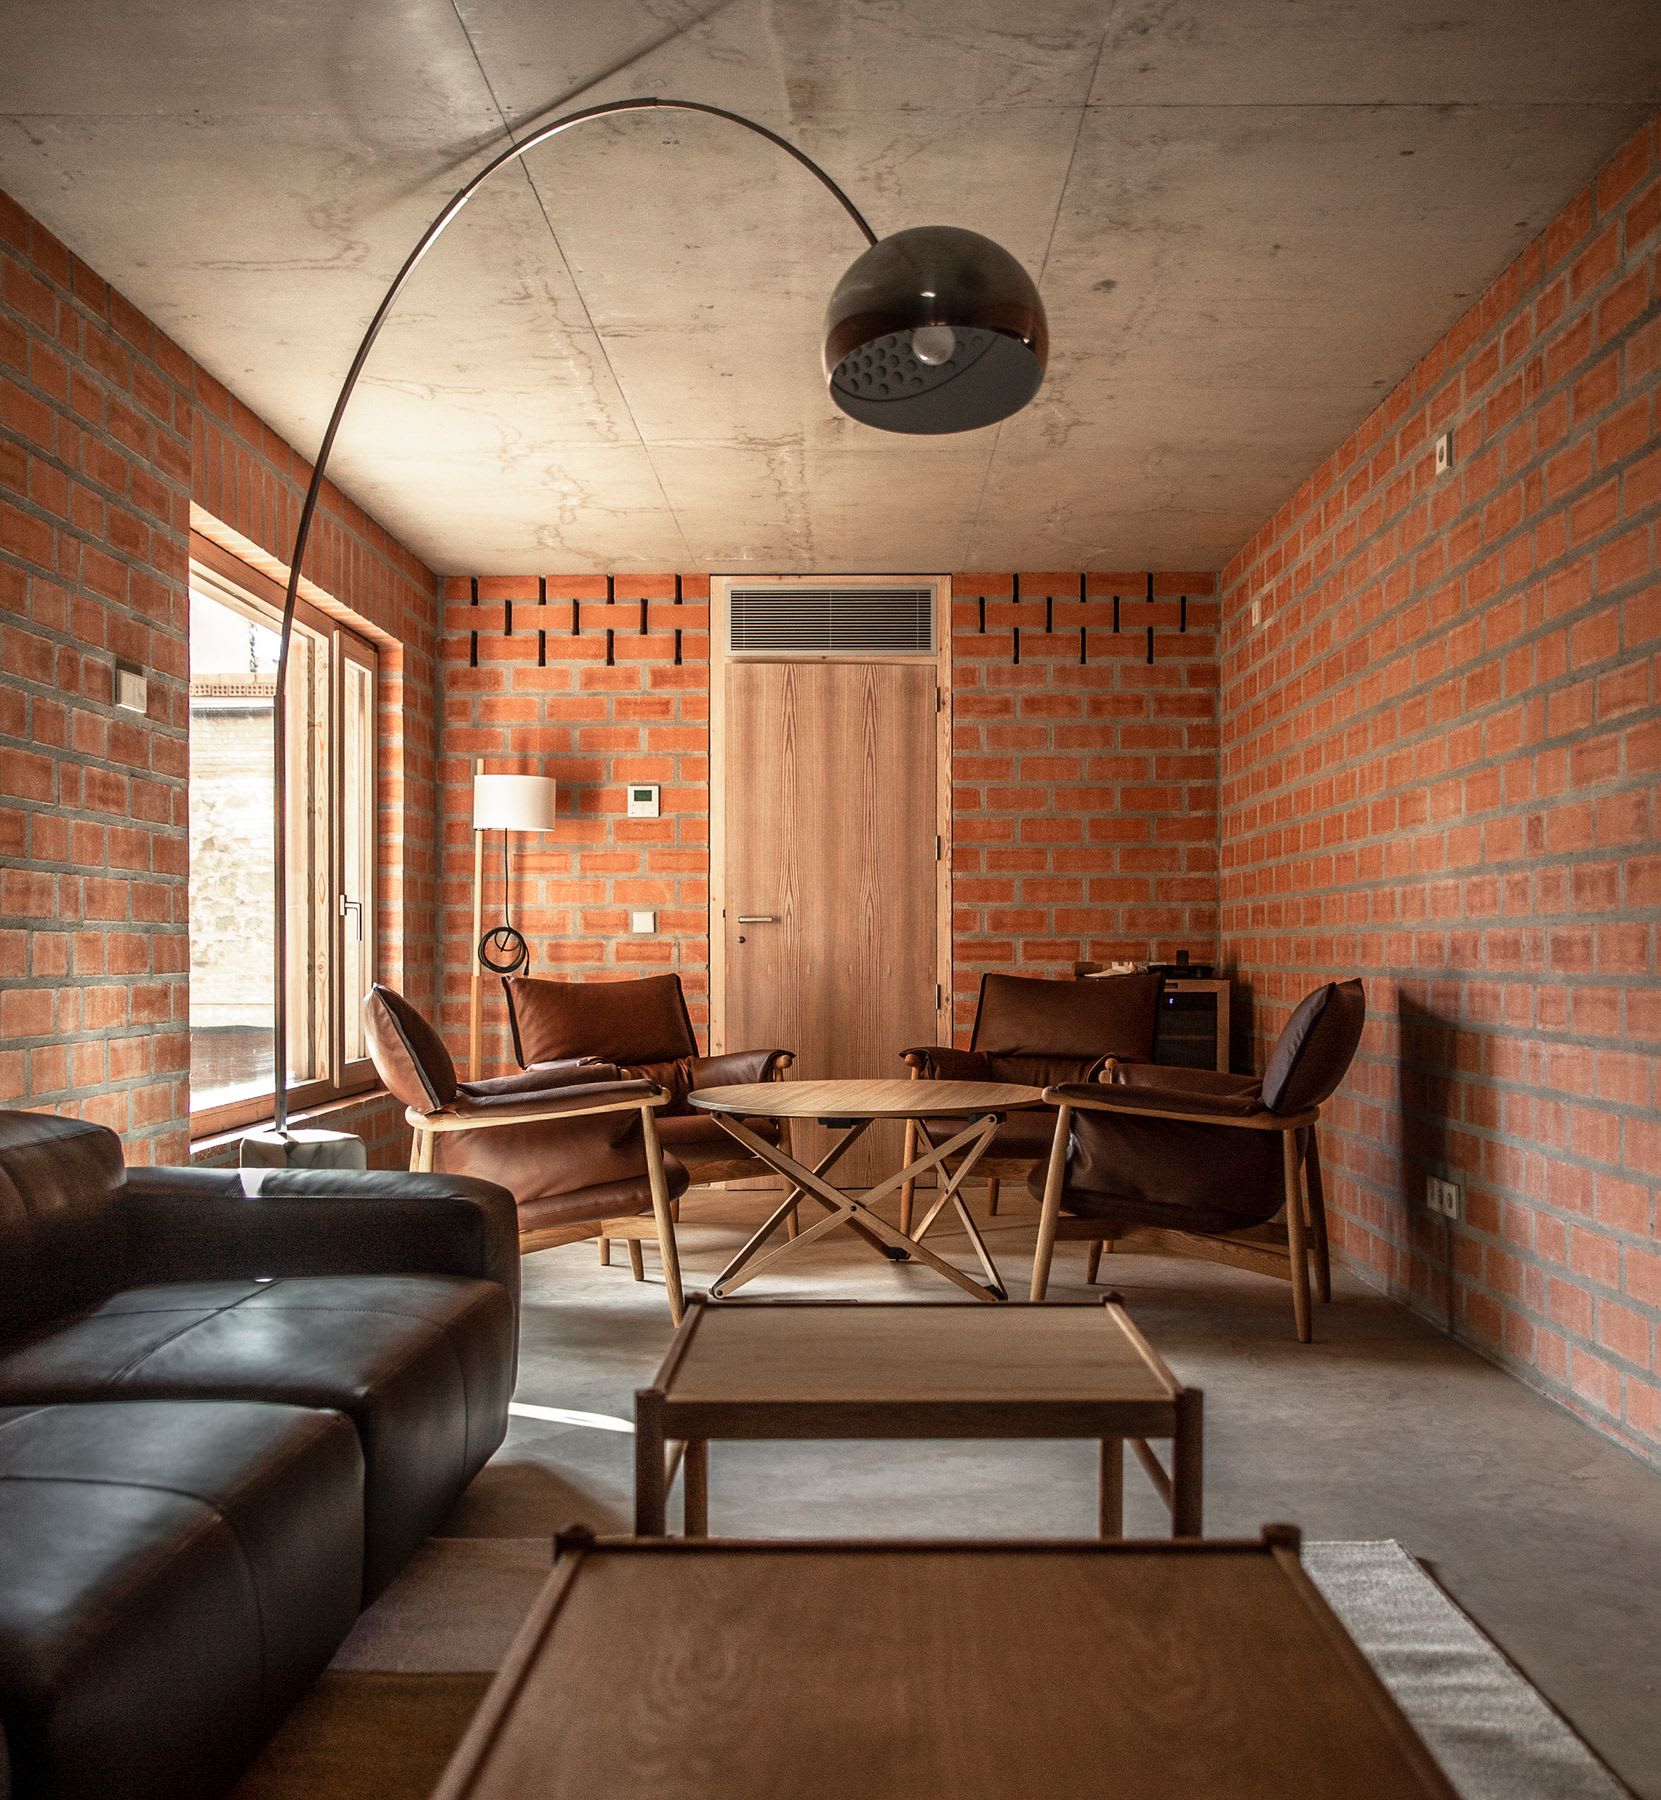 Living room with exposed brick walls and a concrete ceiling, featuring a mix of leather and wooden furniture, including a black leather sofa, brown leather chairs, and wooden tables, illuminated by natural light from large windows.